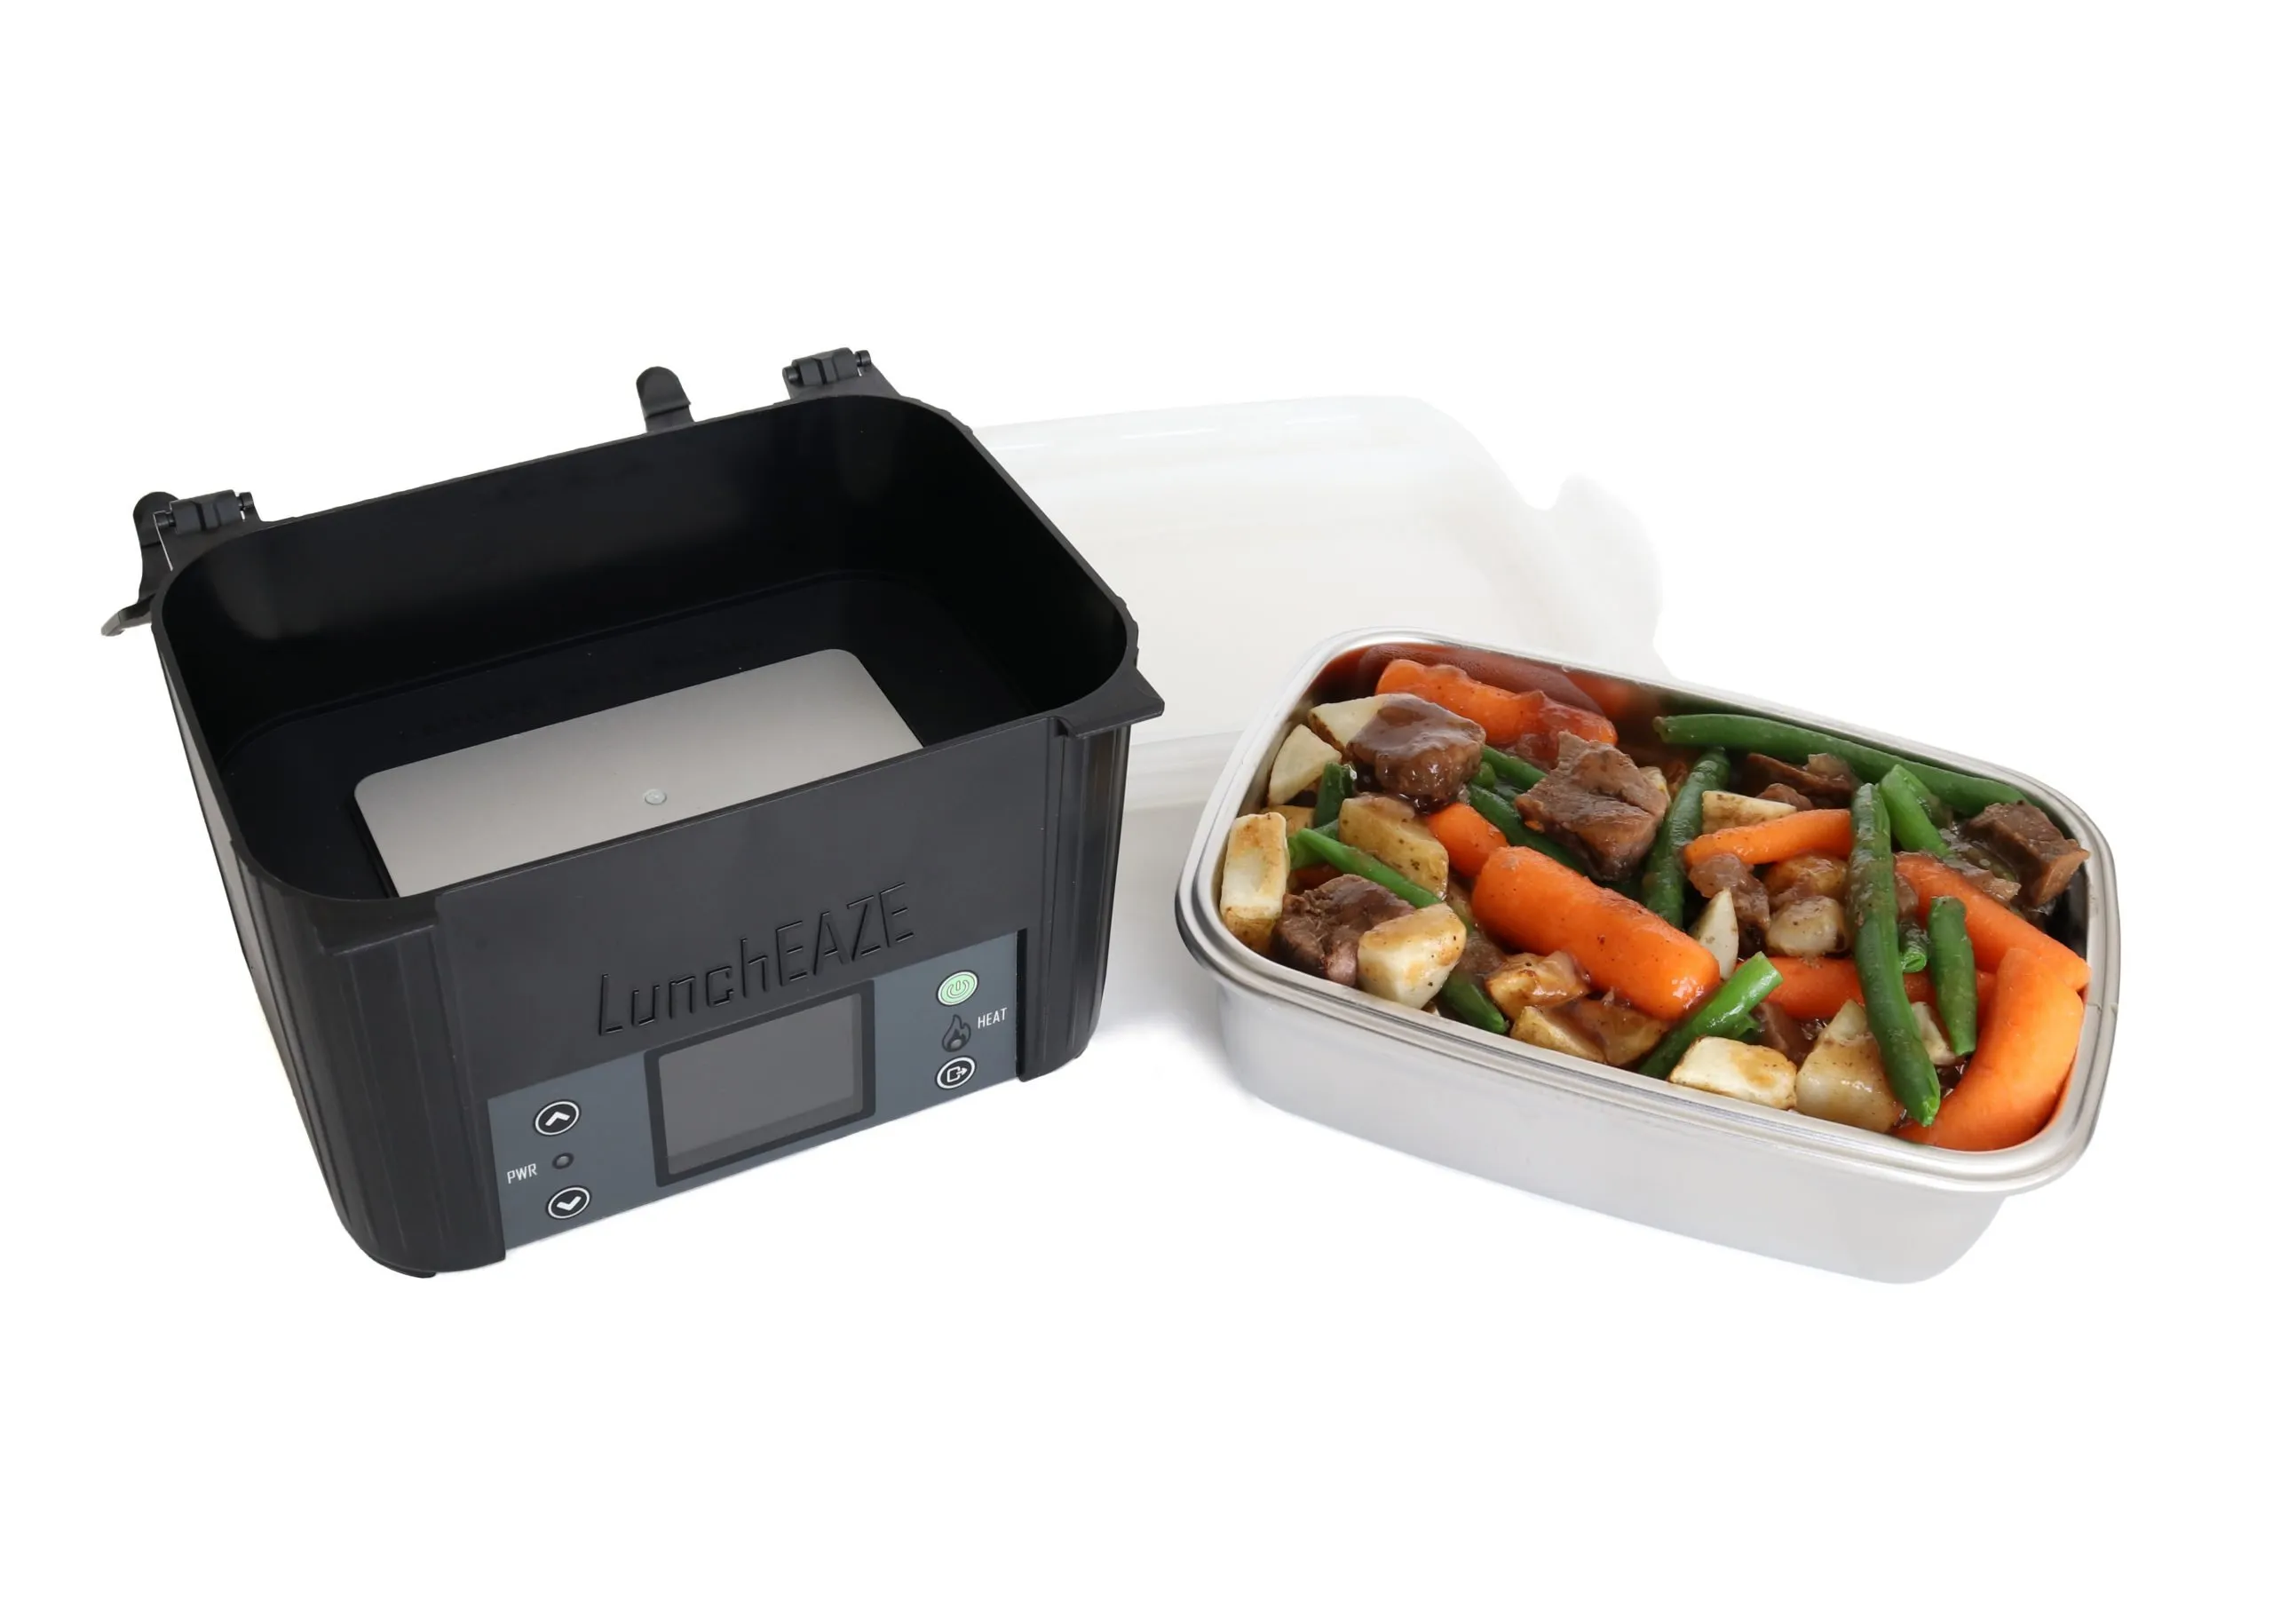 LunchEAZE heated lunch box